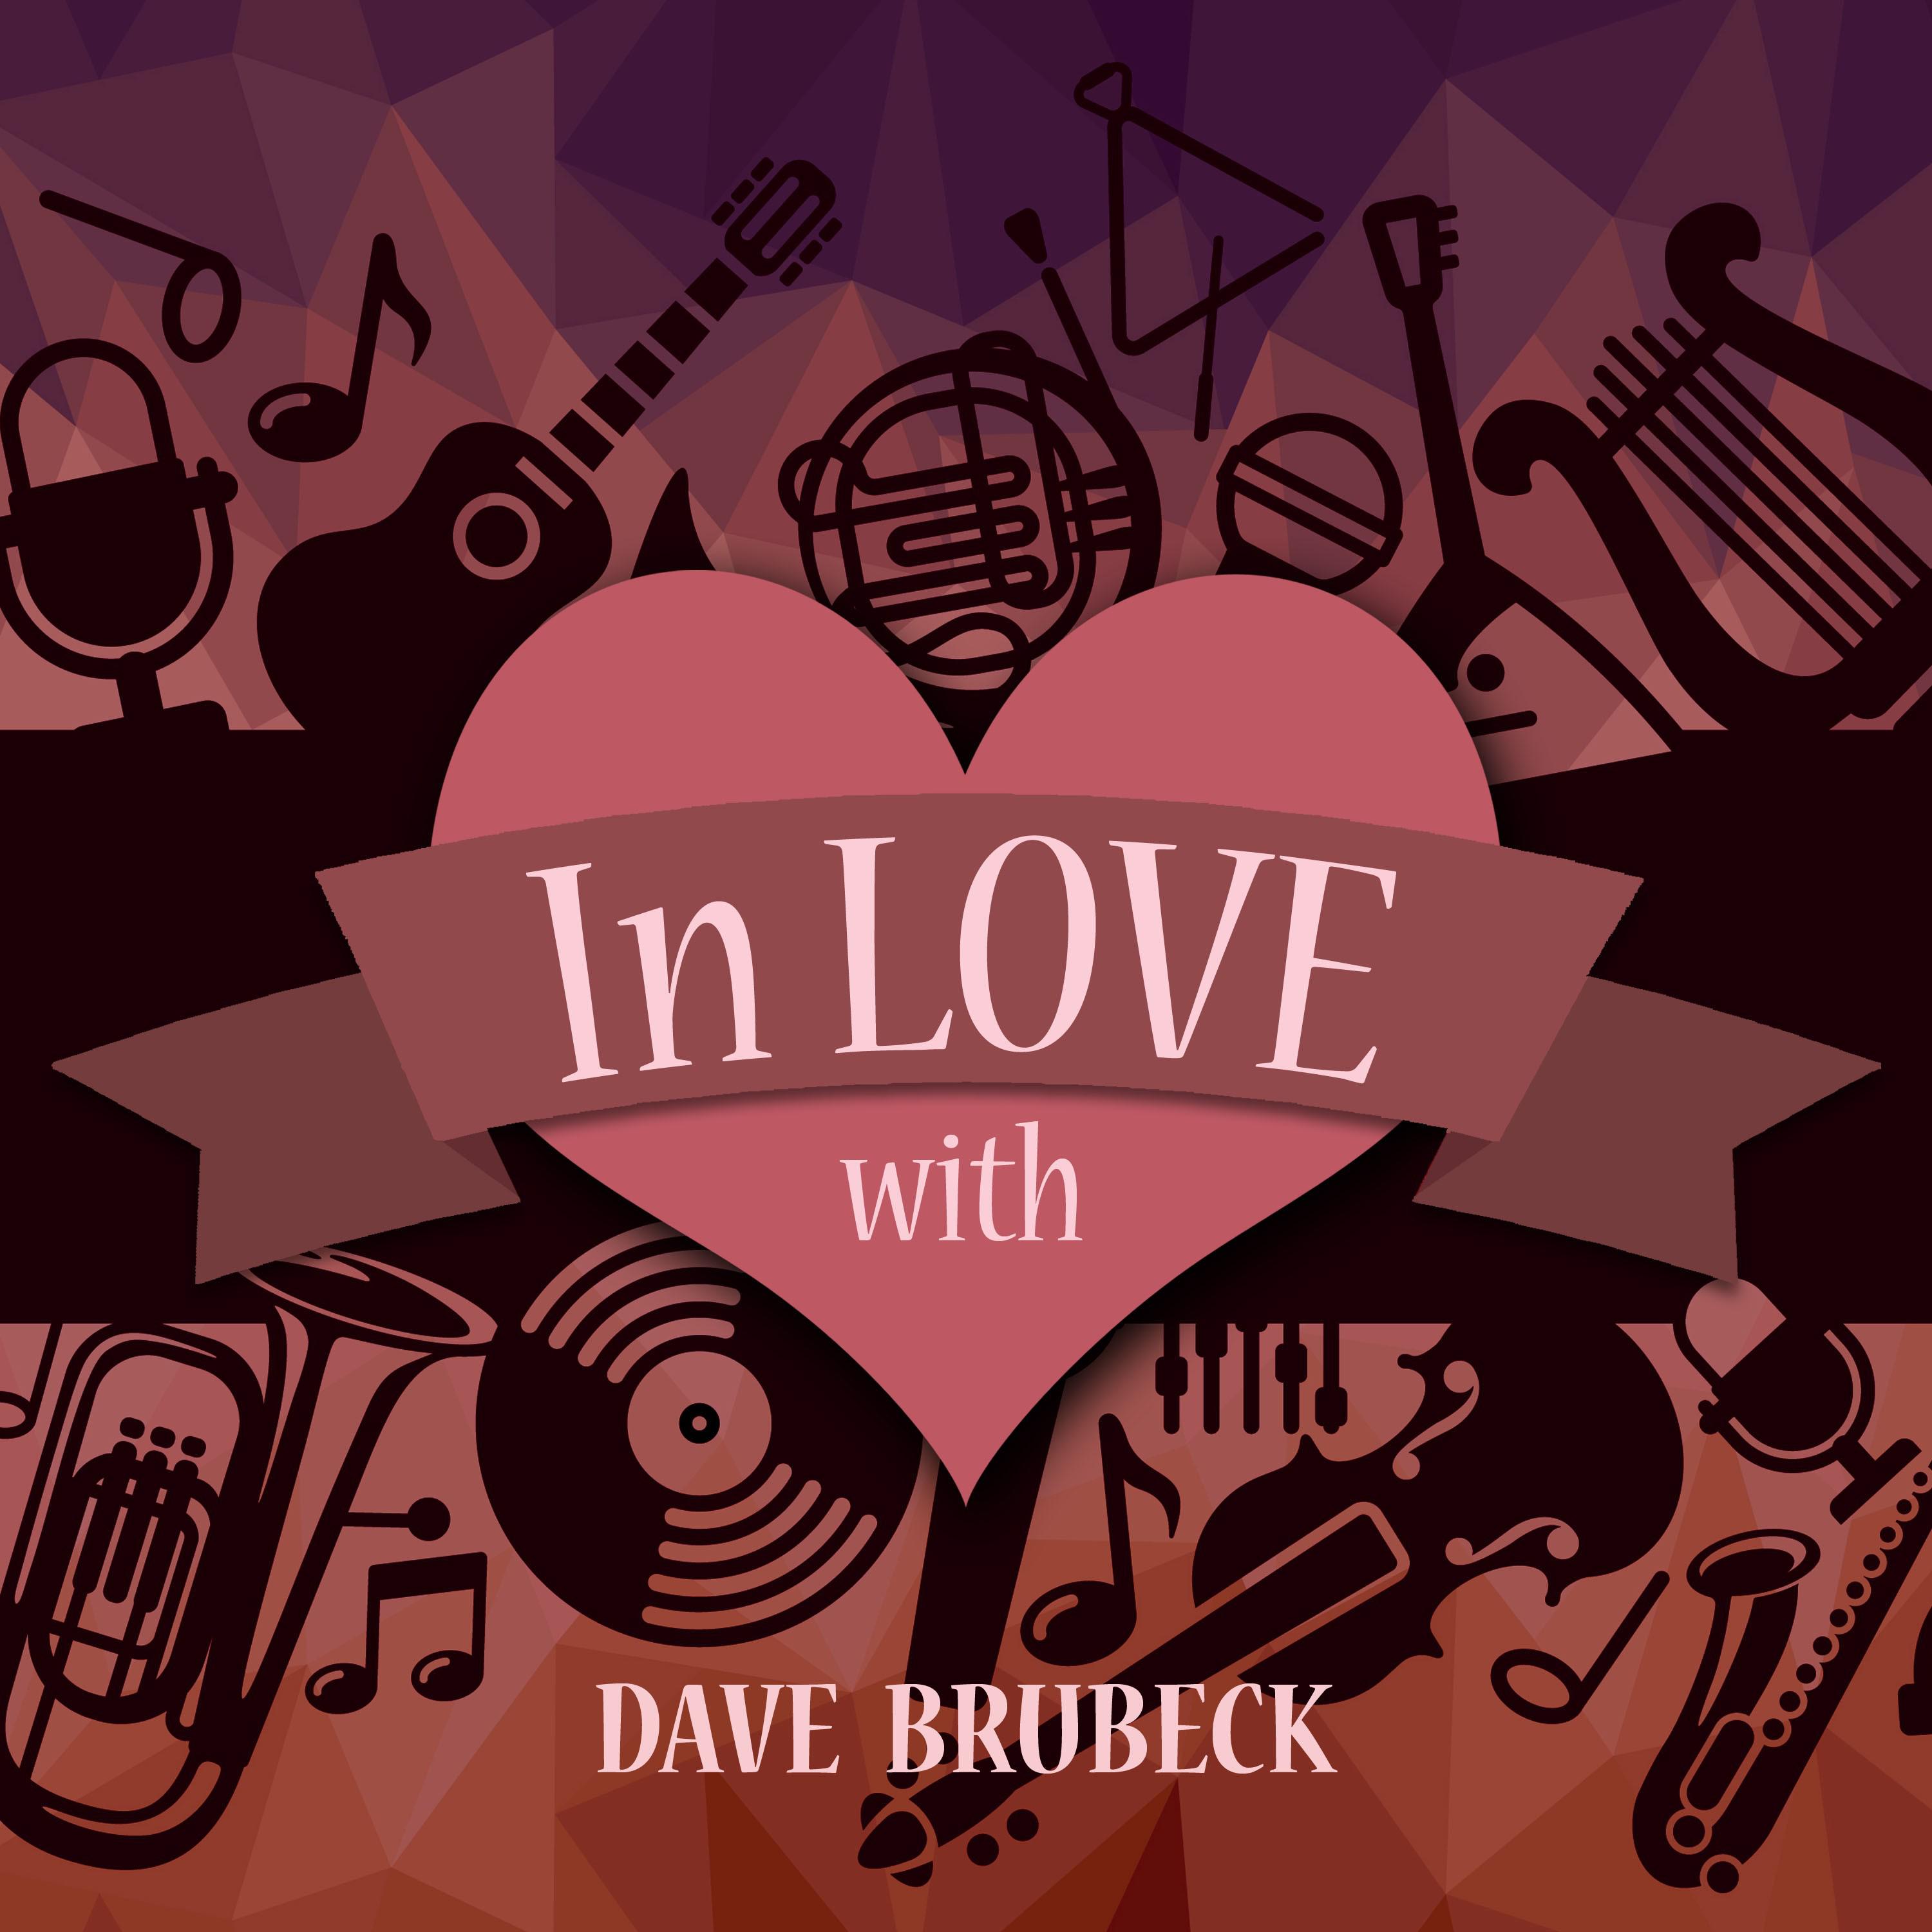 In Love with Dave Brubeck